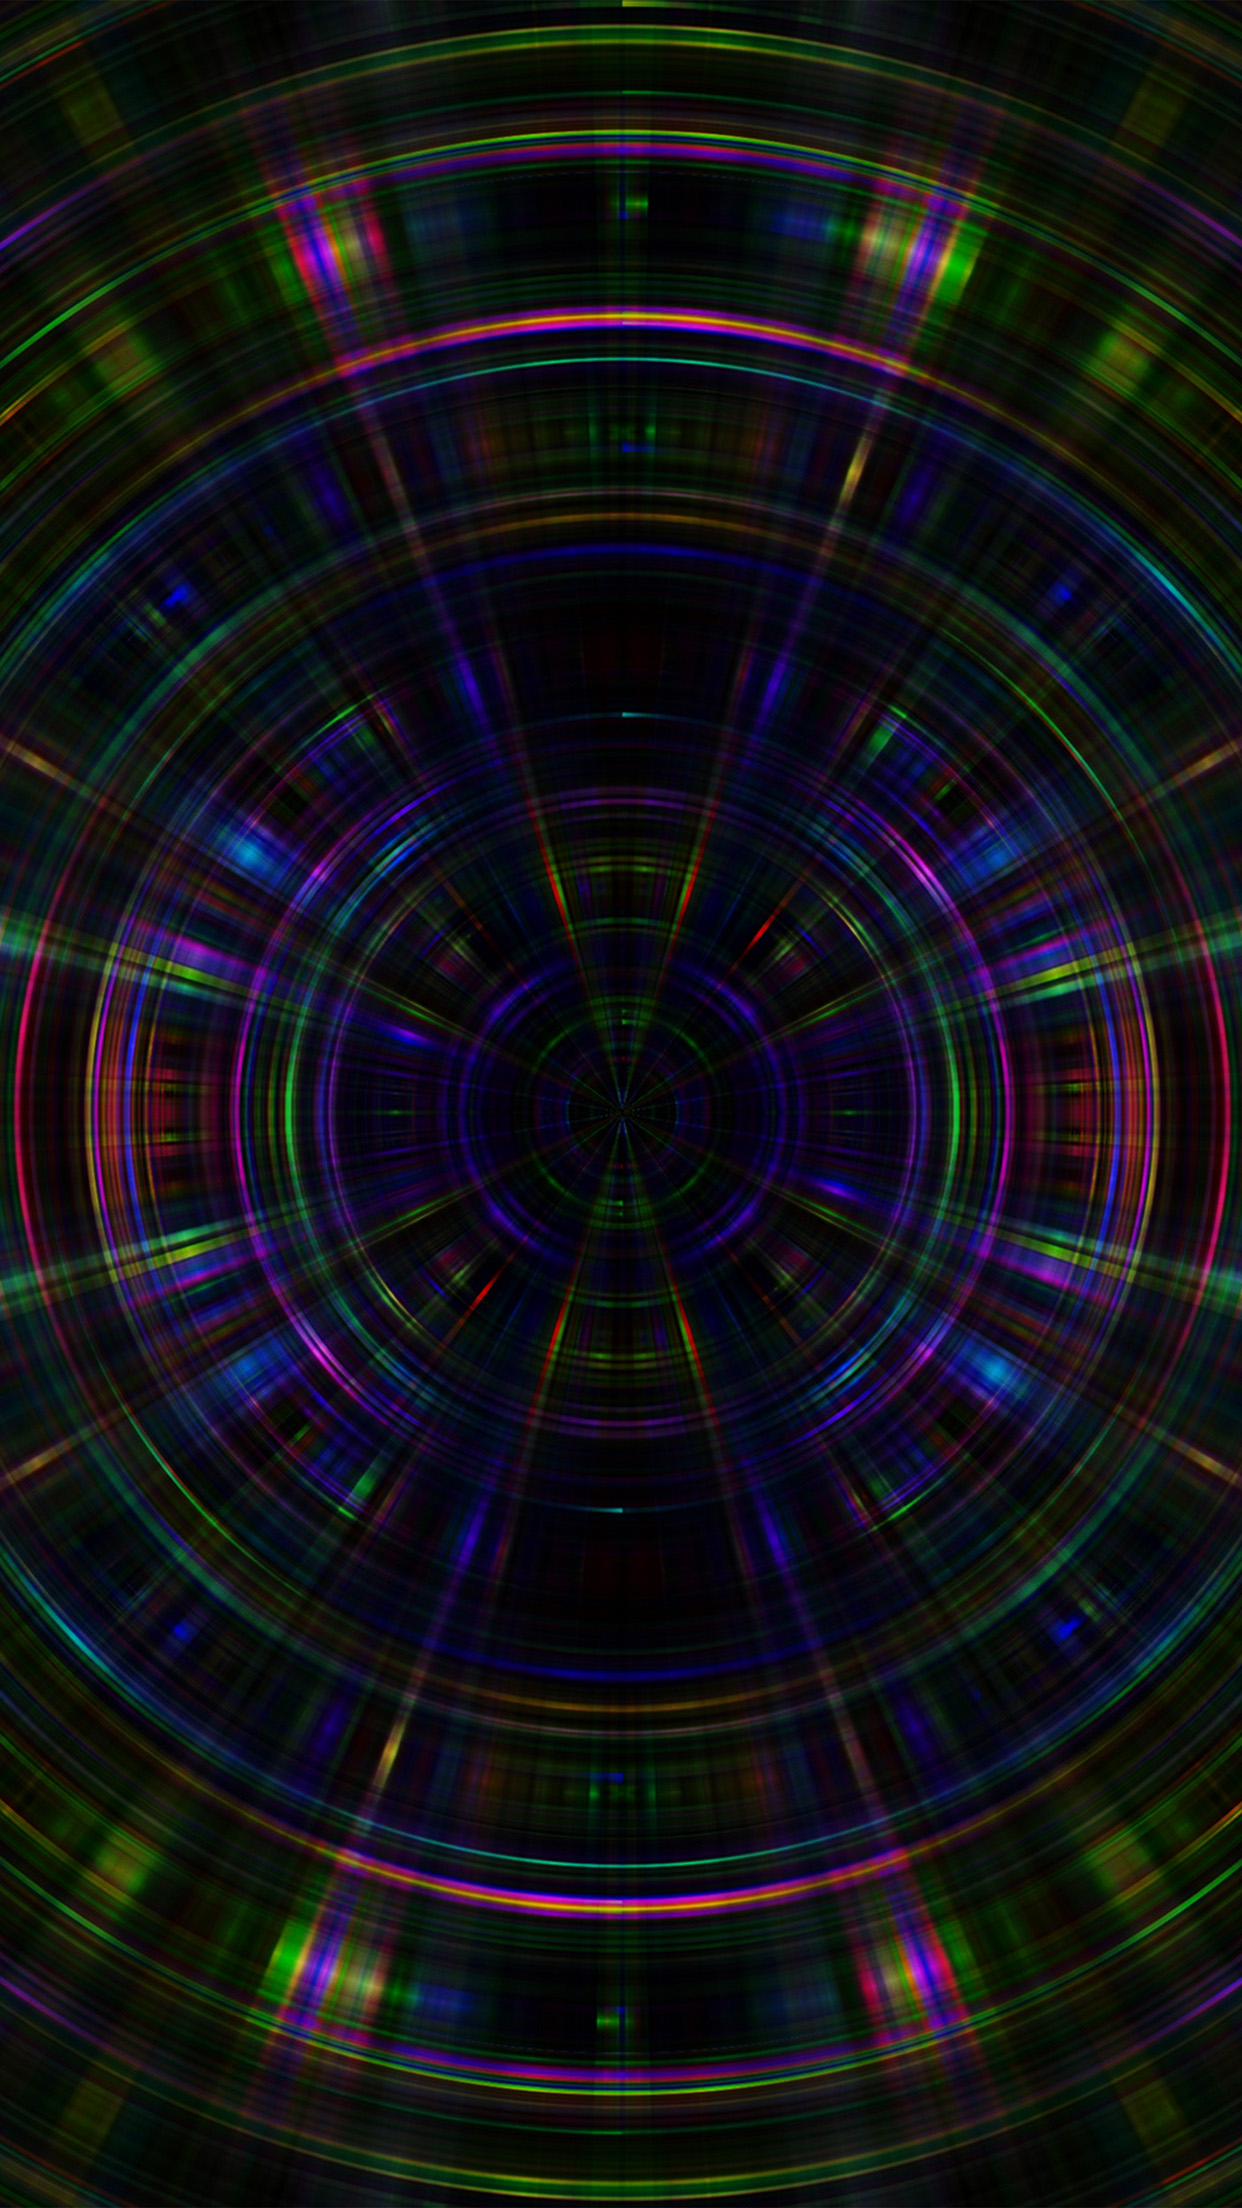 Psychic Color Circle Abstract Dark Rainbow Pattern Android wallpaper